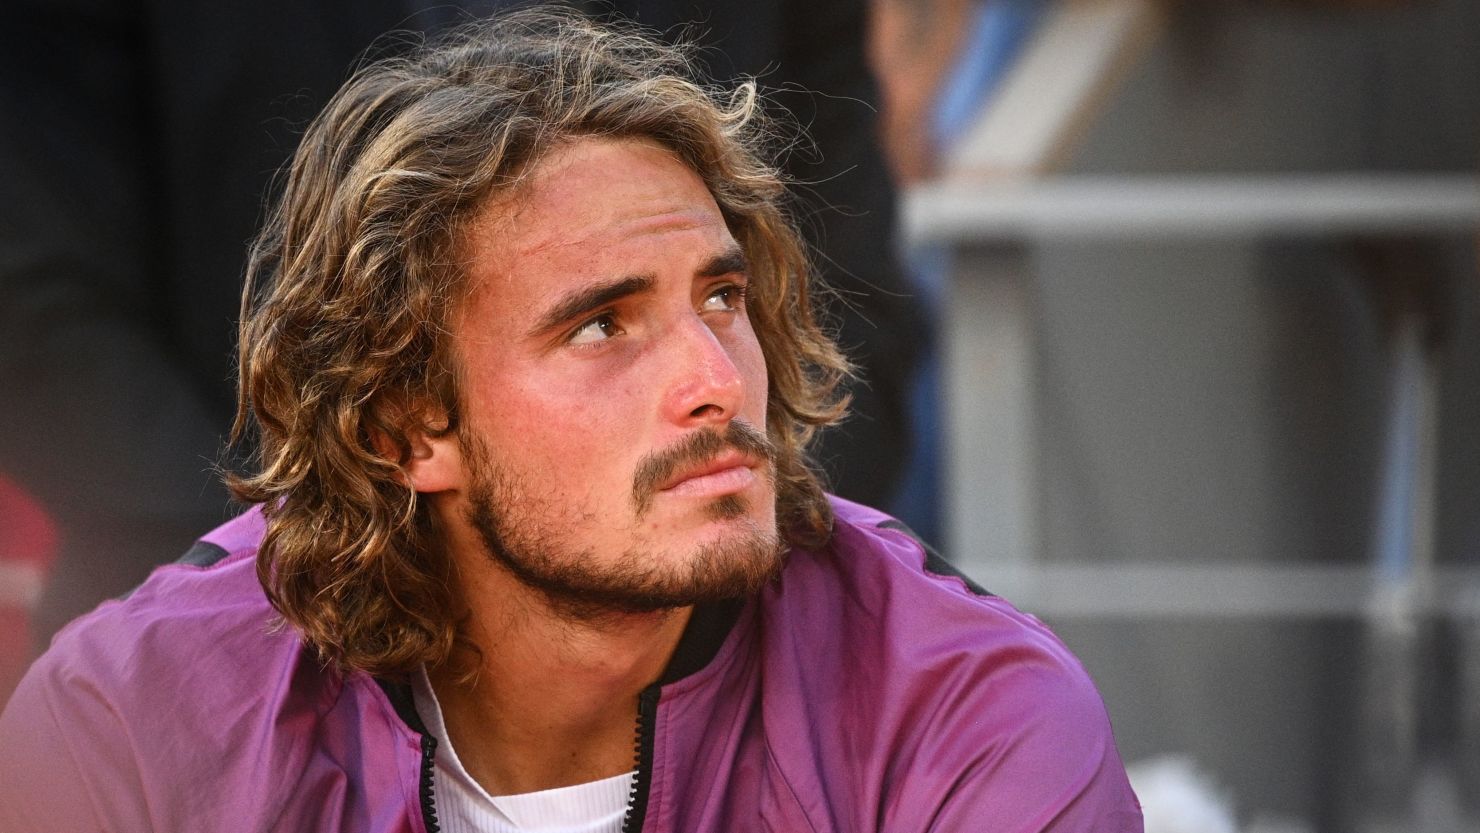 Tsitsipas played in his first grand slam final at this year's French Open. 